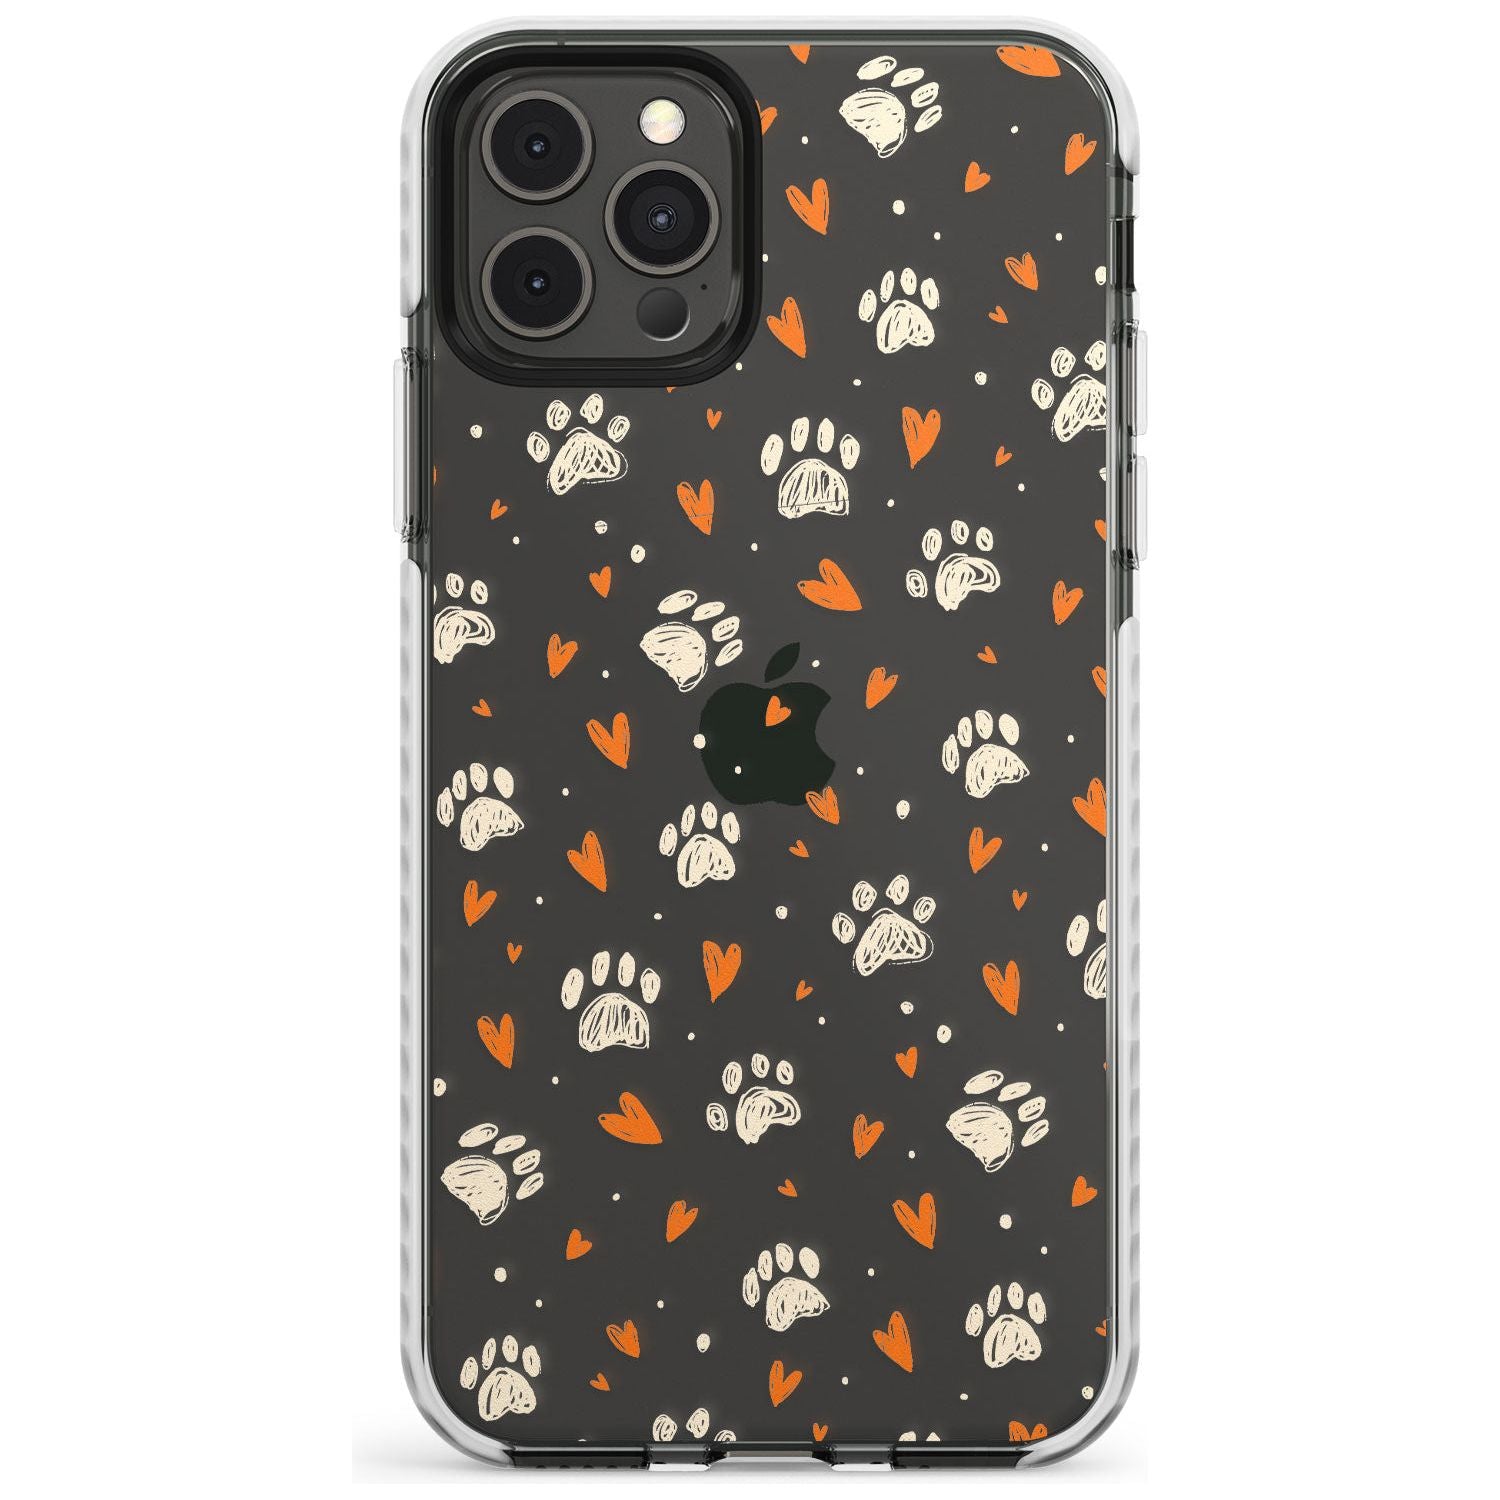 Paws & Hearts Pattern (Clear) Slim TPU Phone Case for iPhone 11 Pro Max